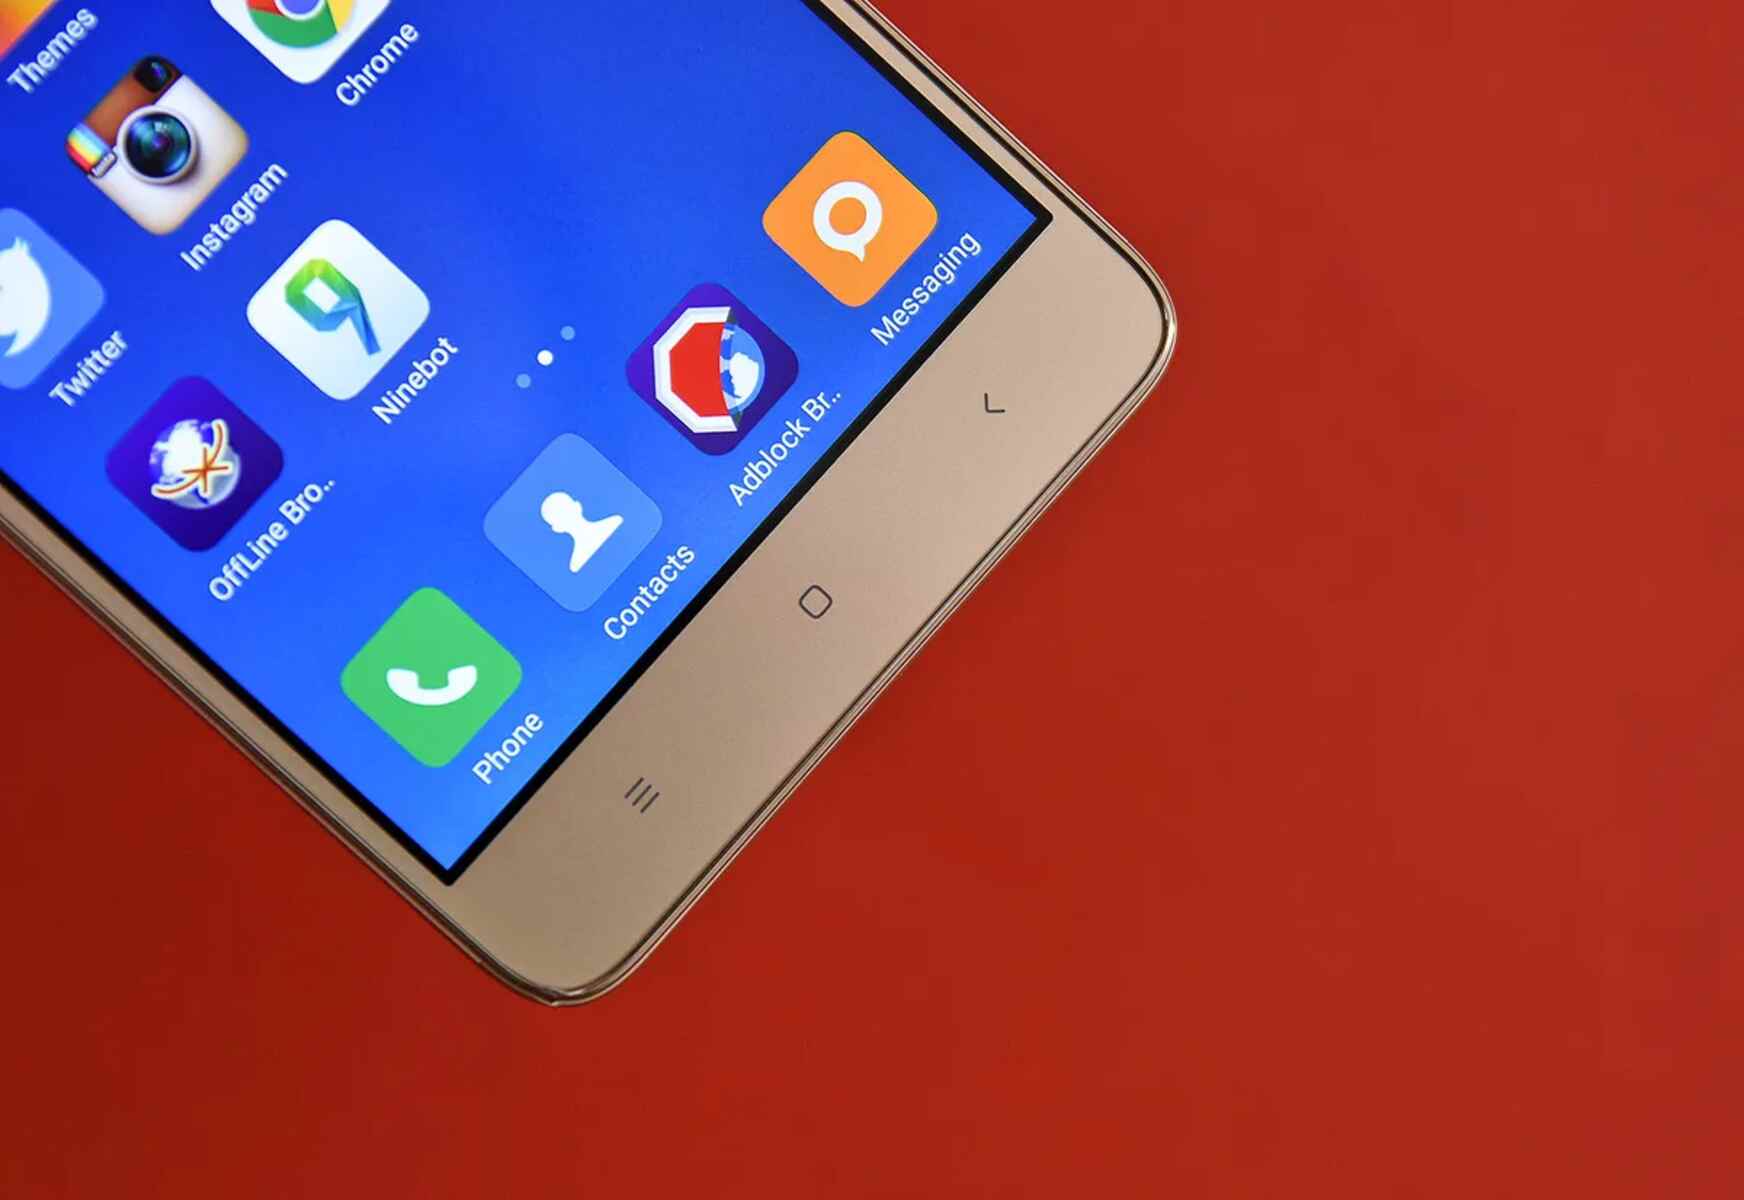 Inserting SIM Card In Redmi Note 3: Step-by-Step Guide